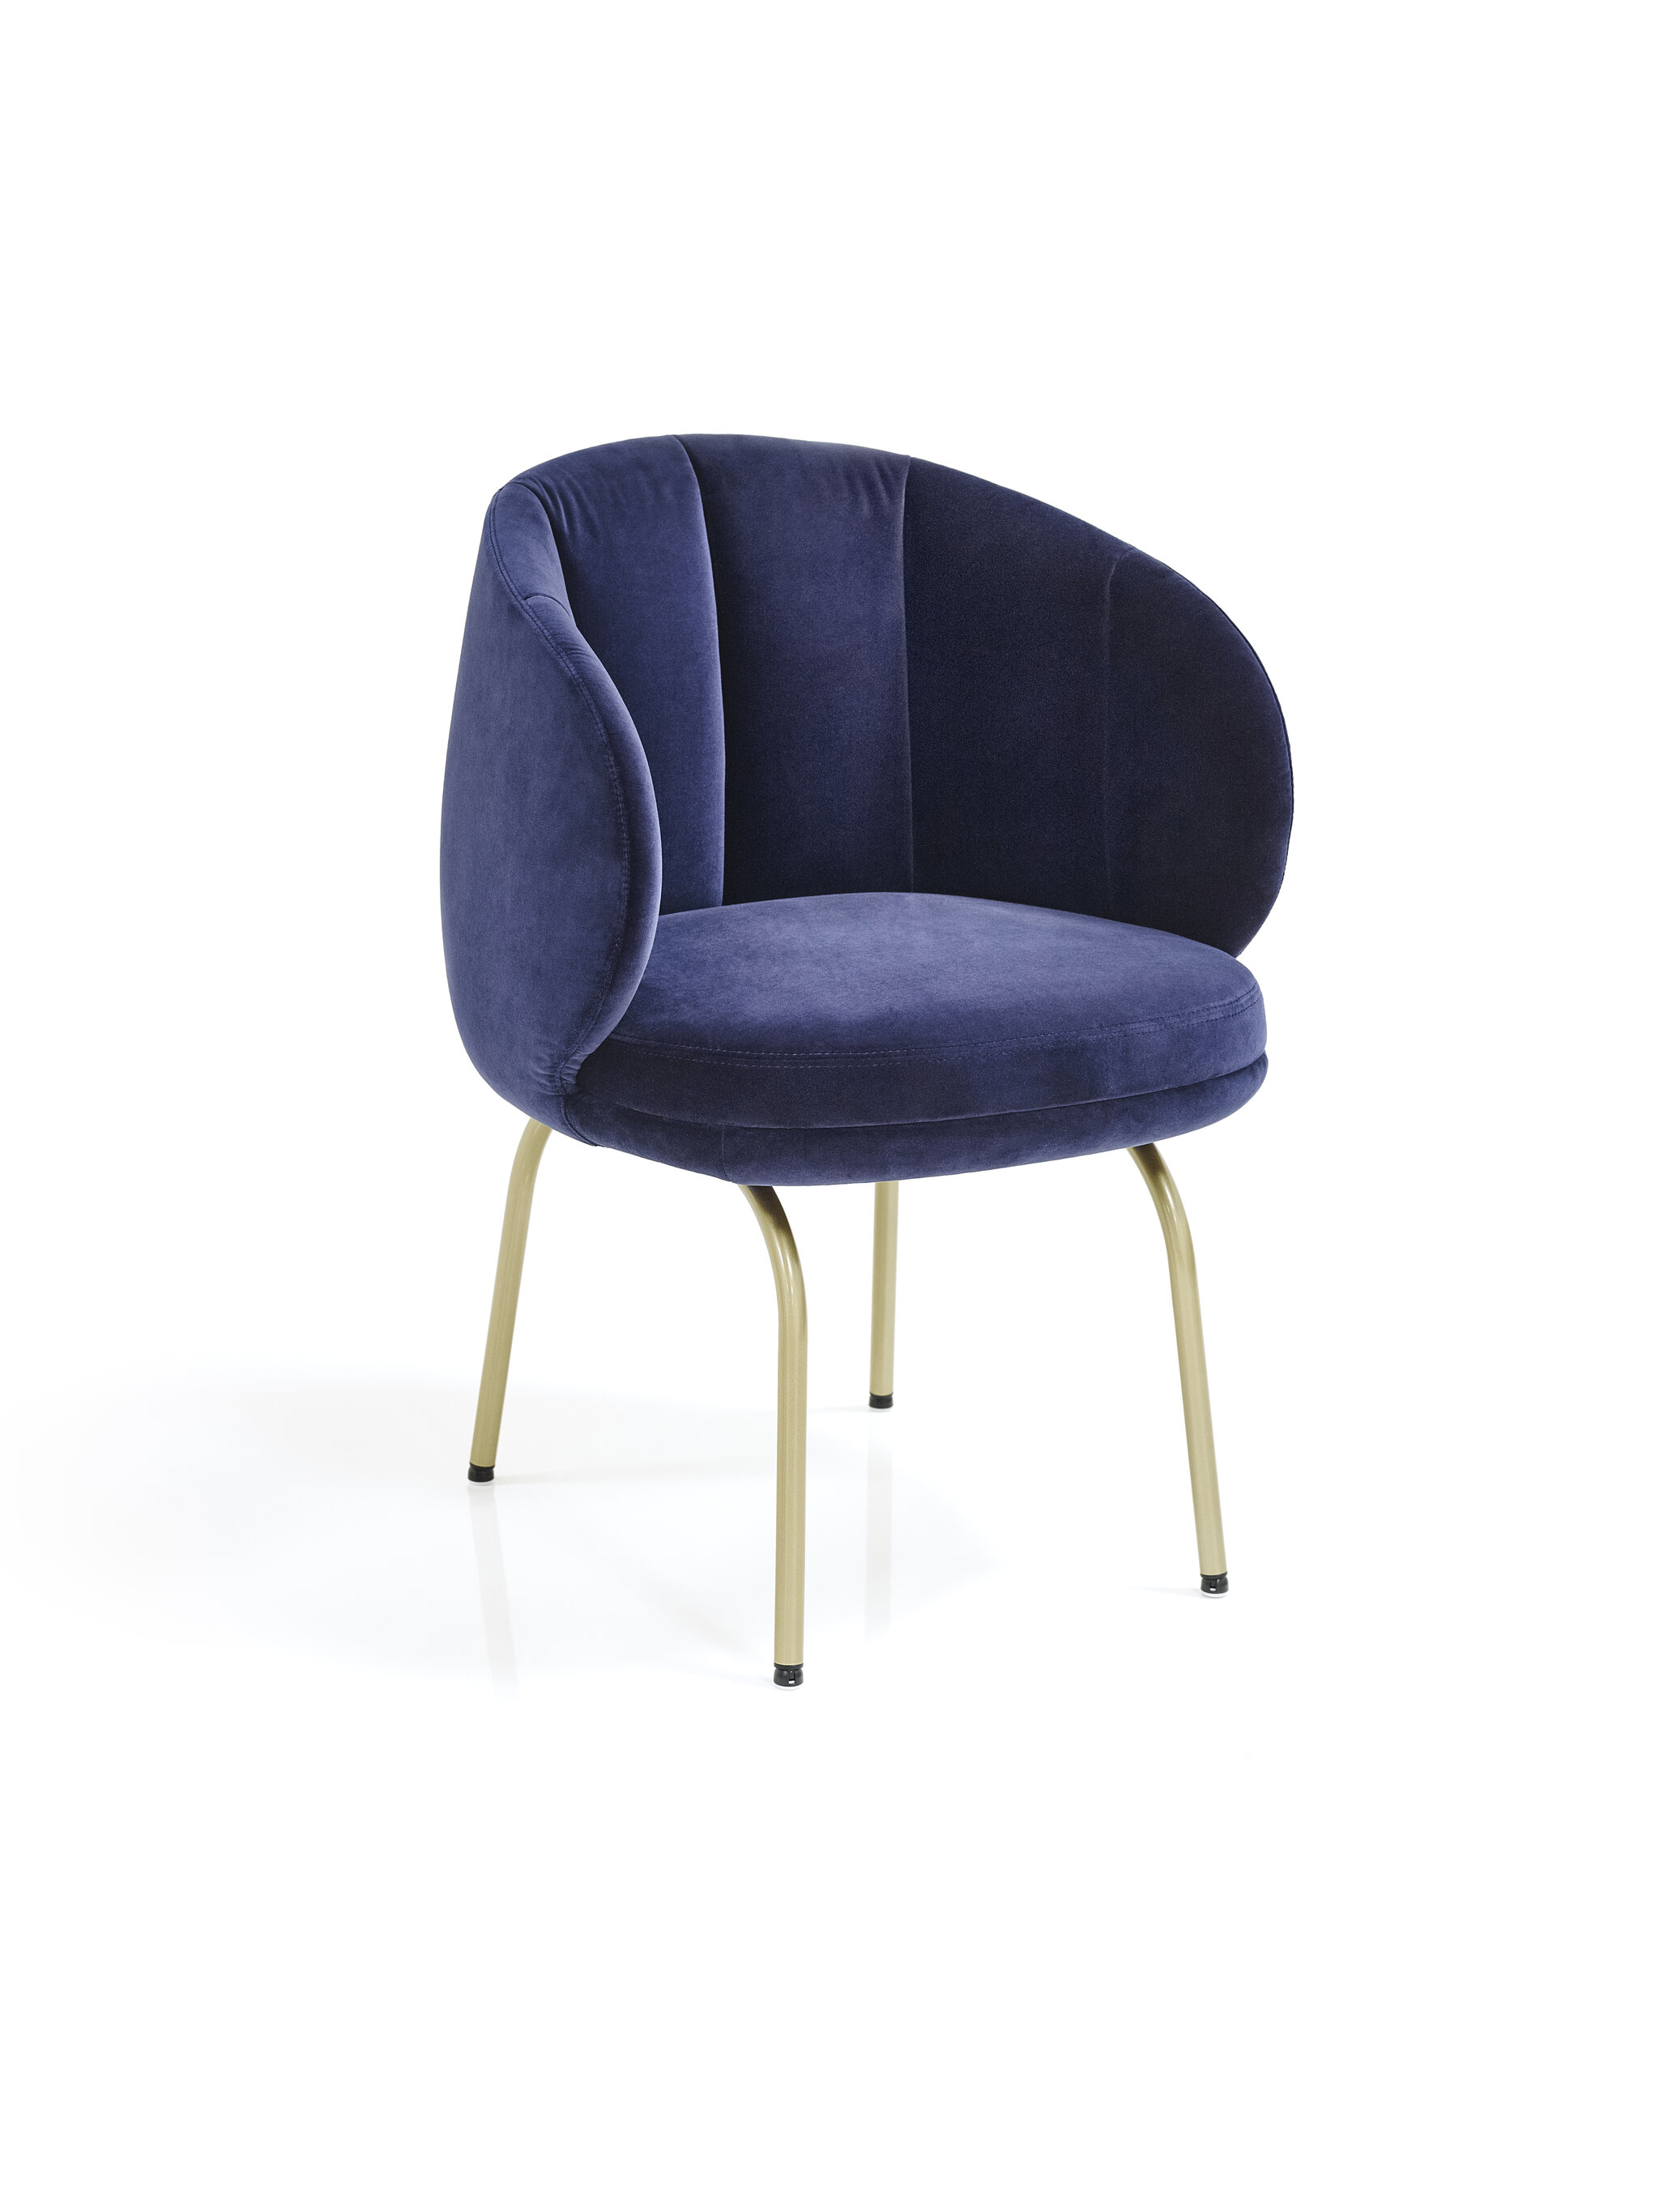 Vuelta FD Chair in dark blue velvet upholstery with brass colored chair legs